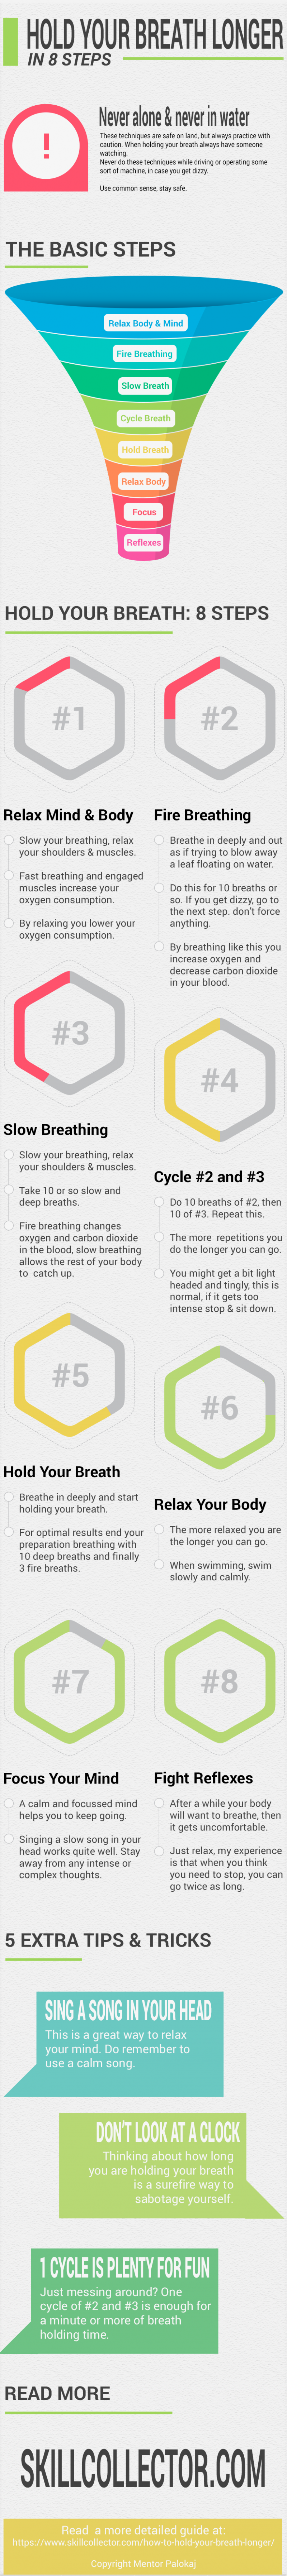 How-To-Hold-Your-Breath-Longer-インフォグラフィック